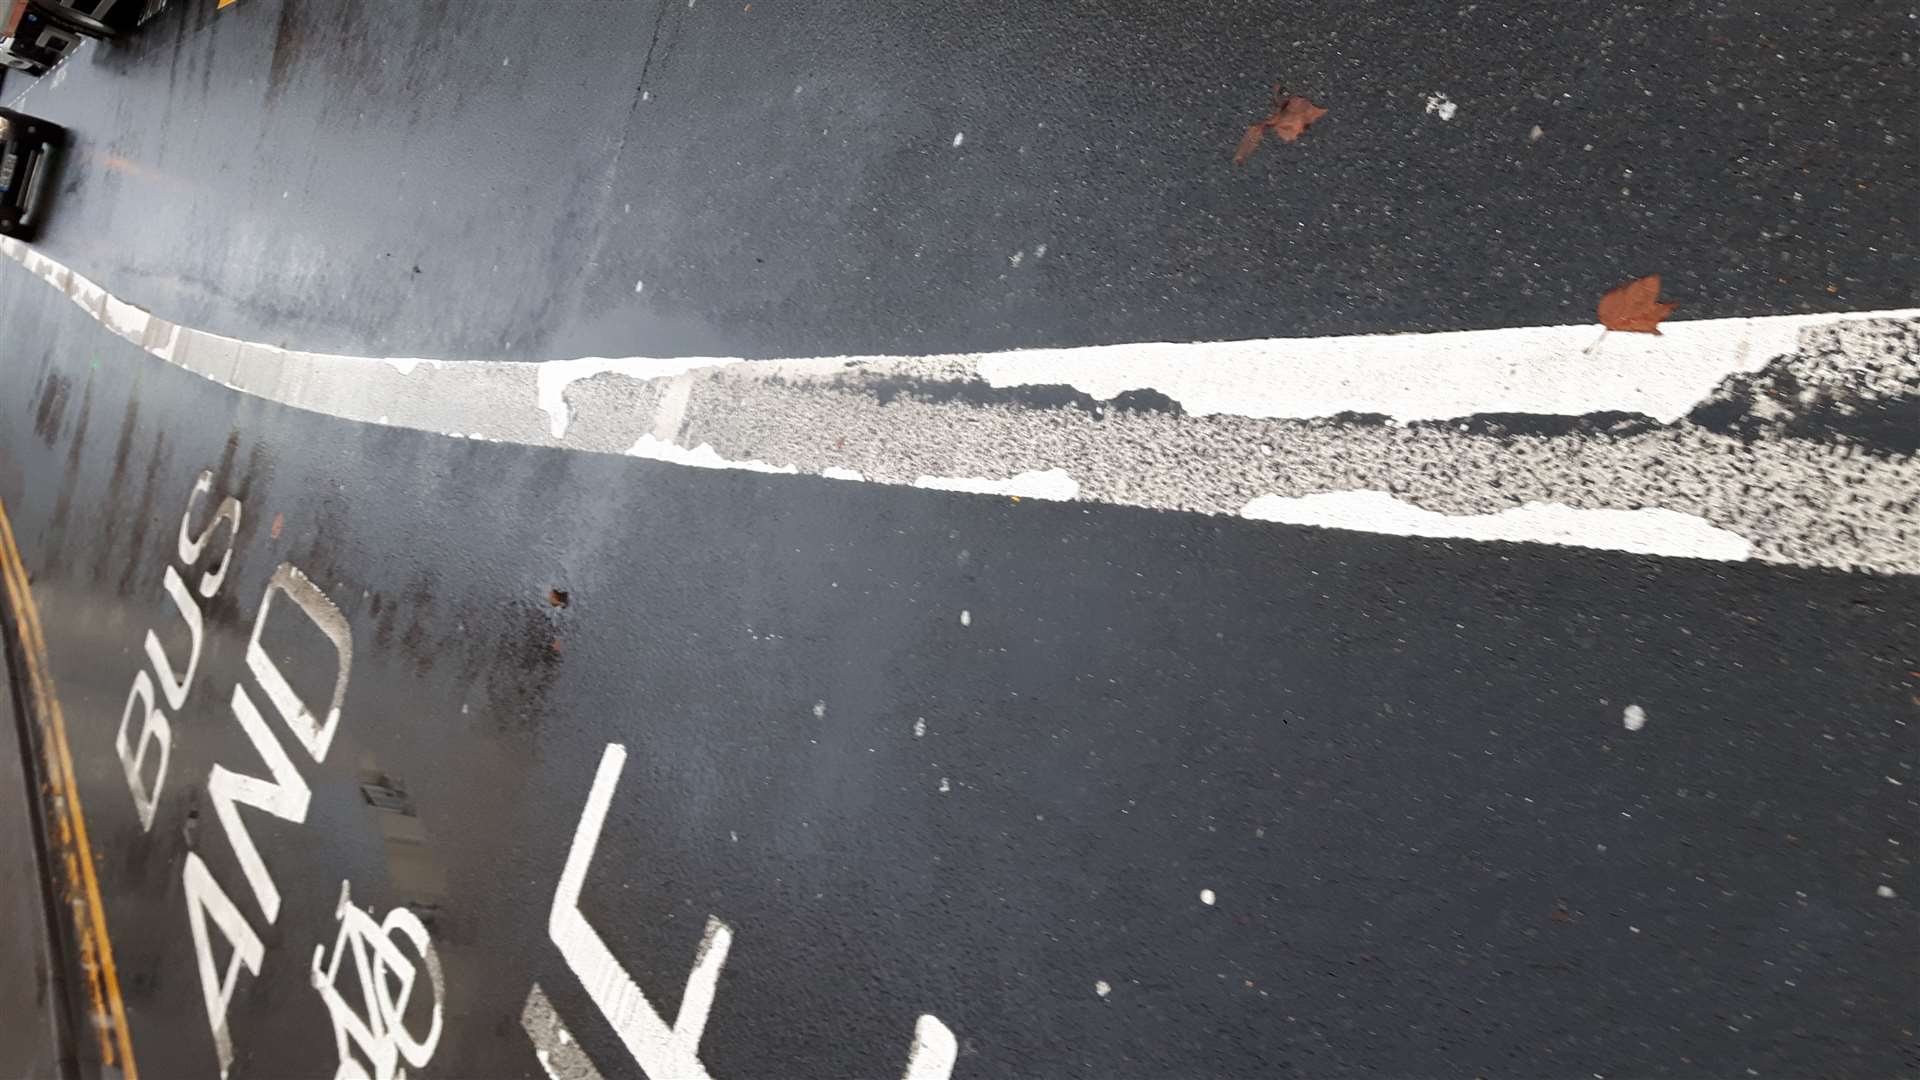 The new bus lane marking in Mill Street washes away